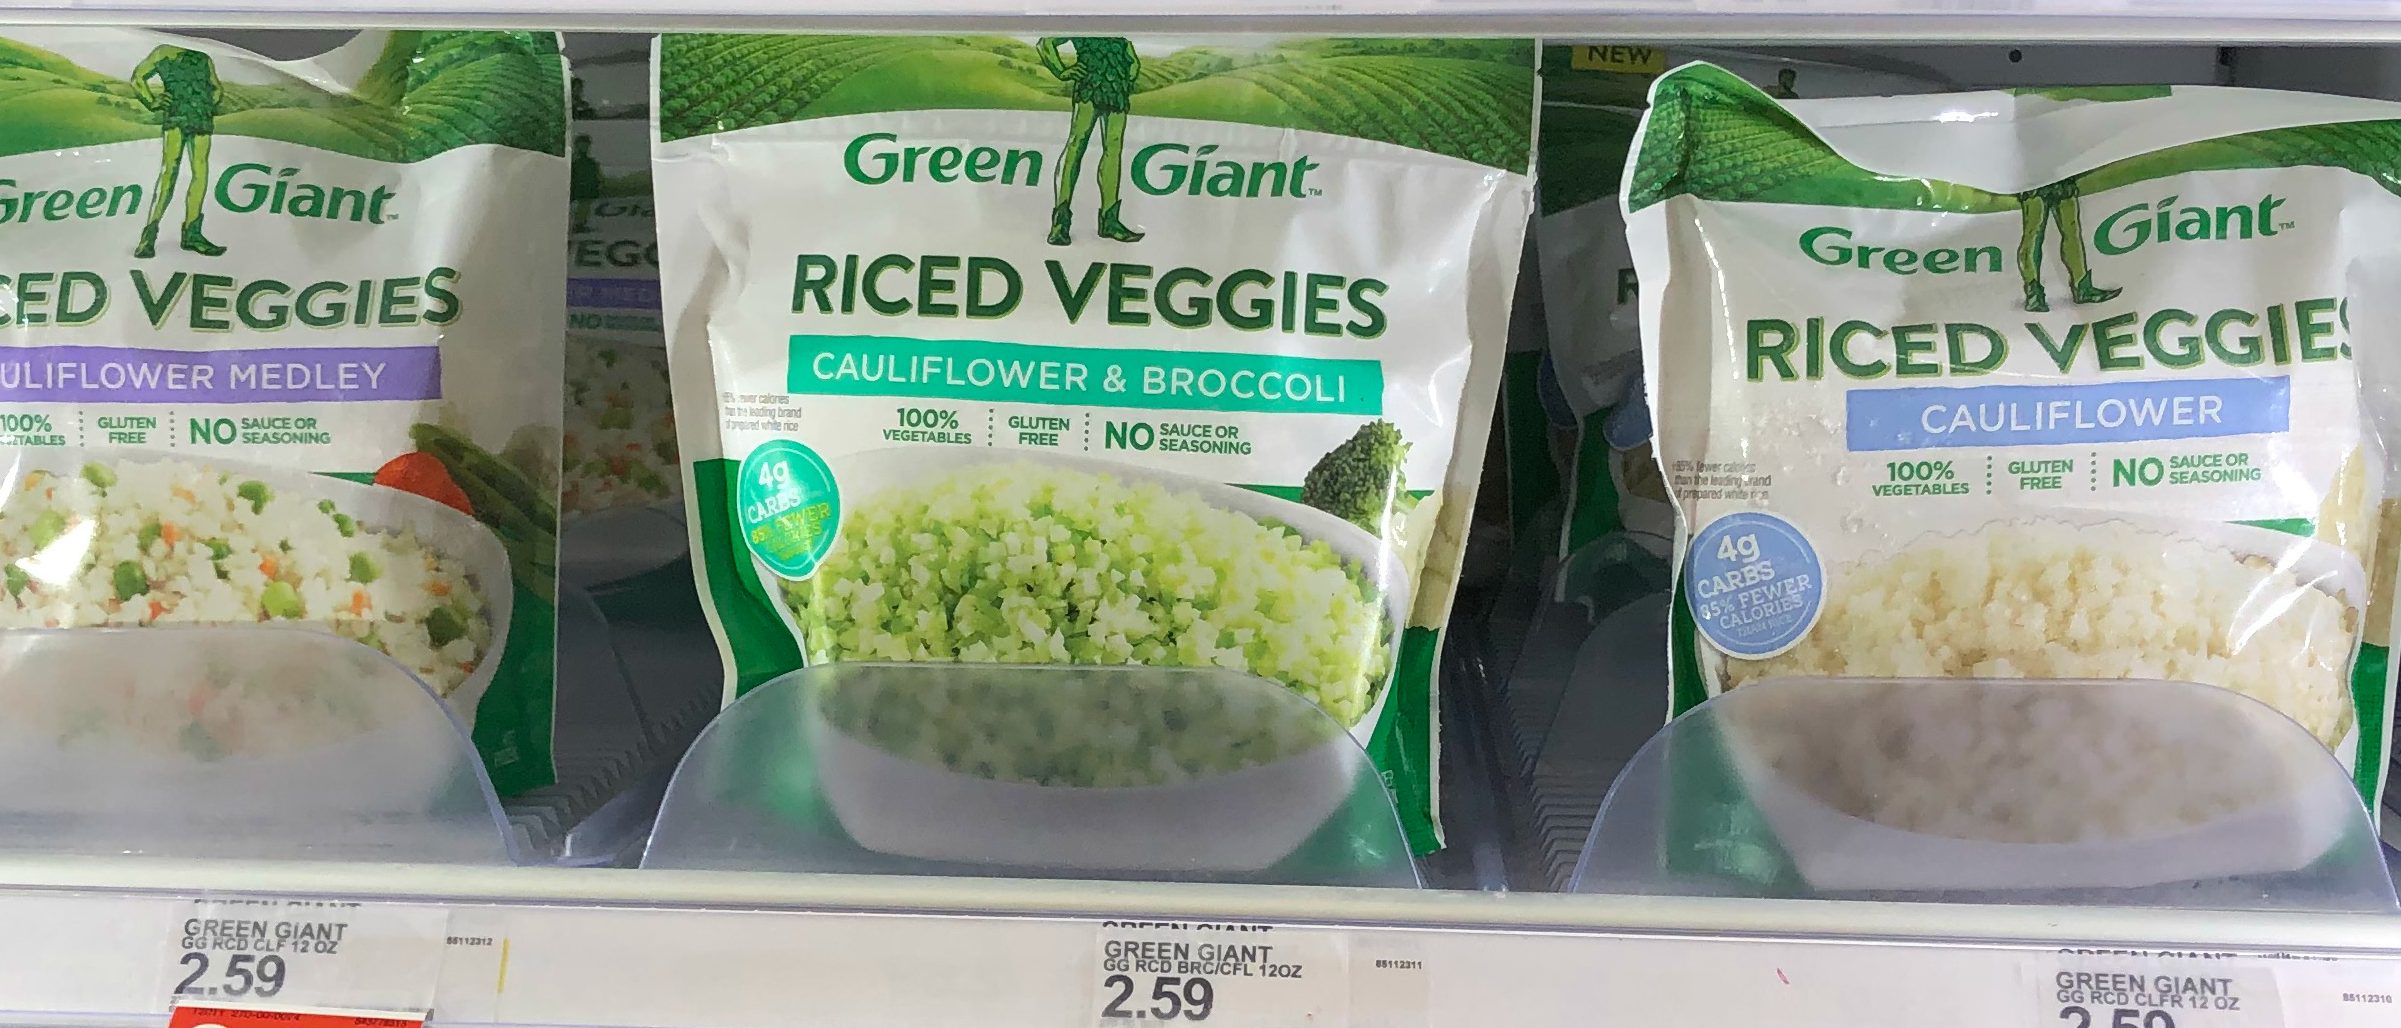 green giant riced veggies are available in the freezer section